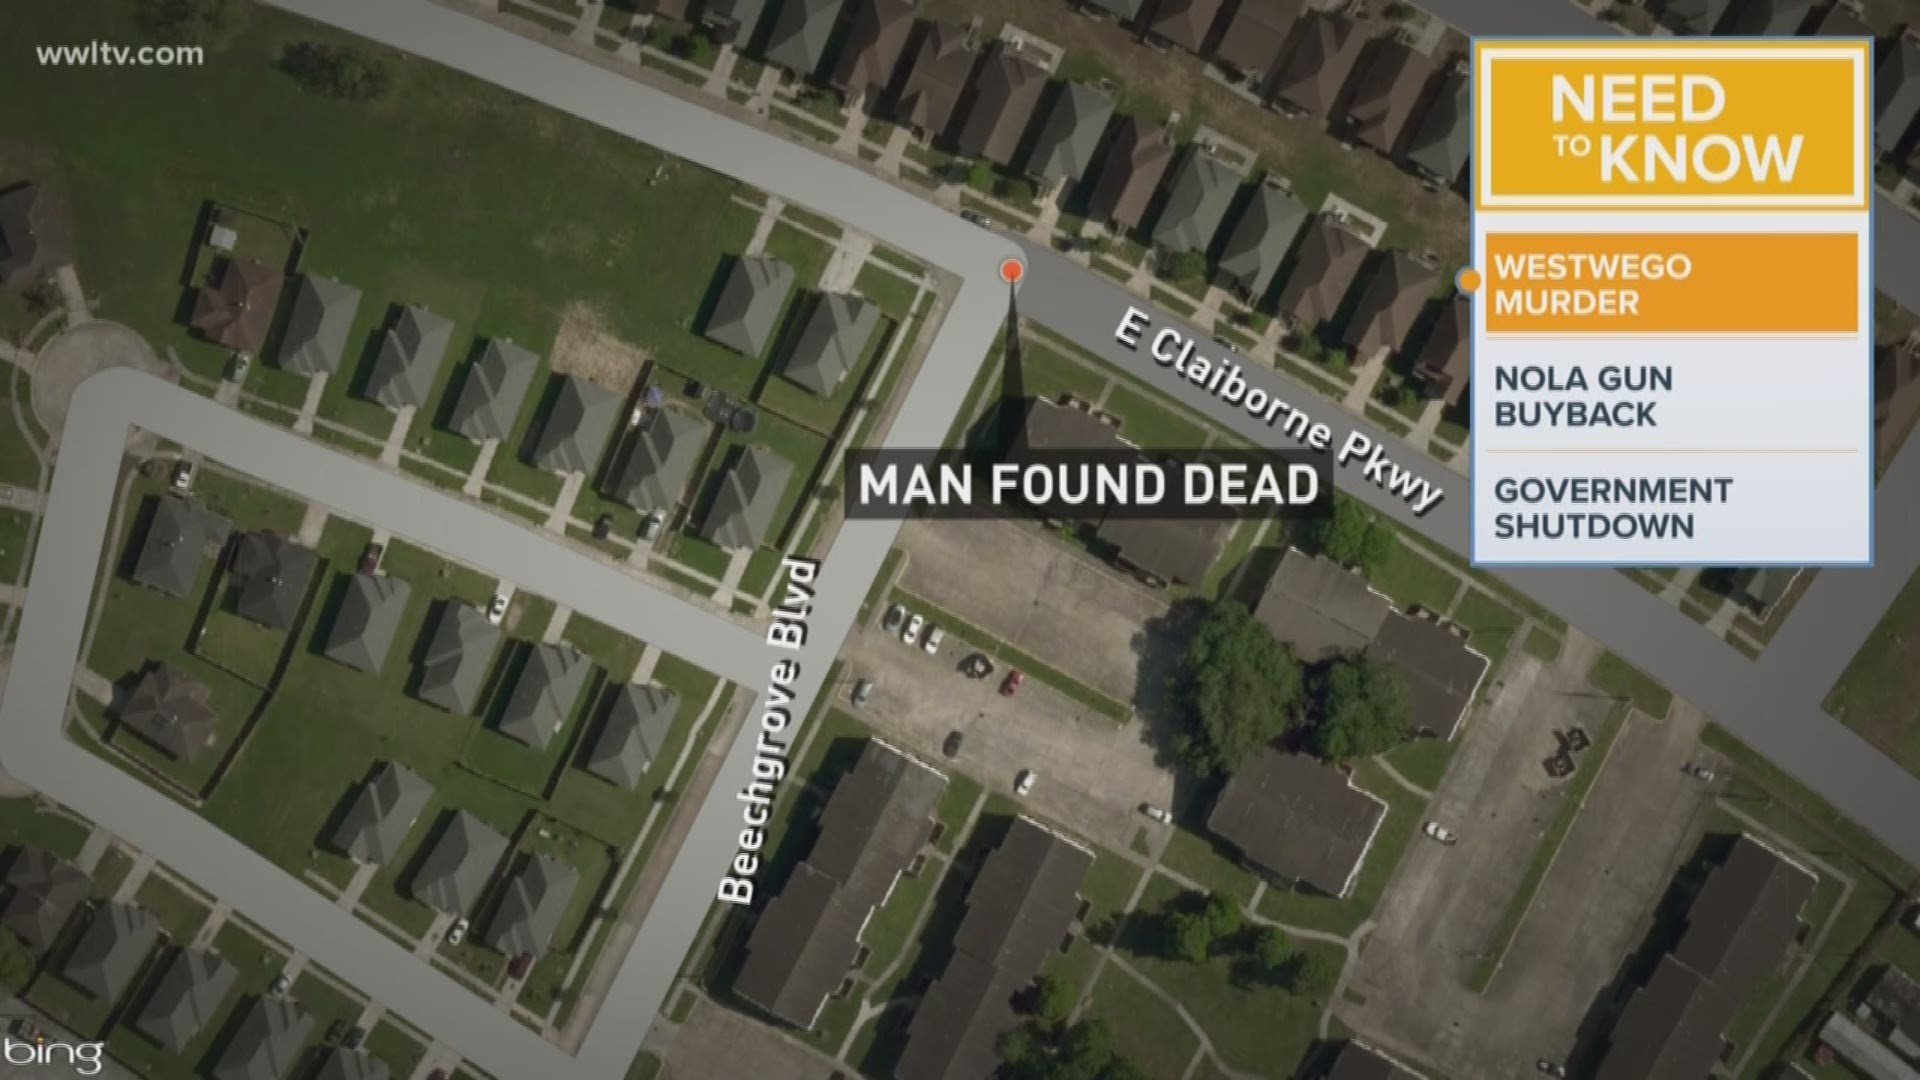 JPSO says the man was found suffering from a gunshot wound in the roadway.